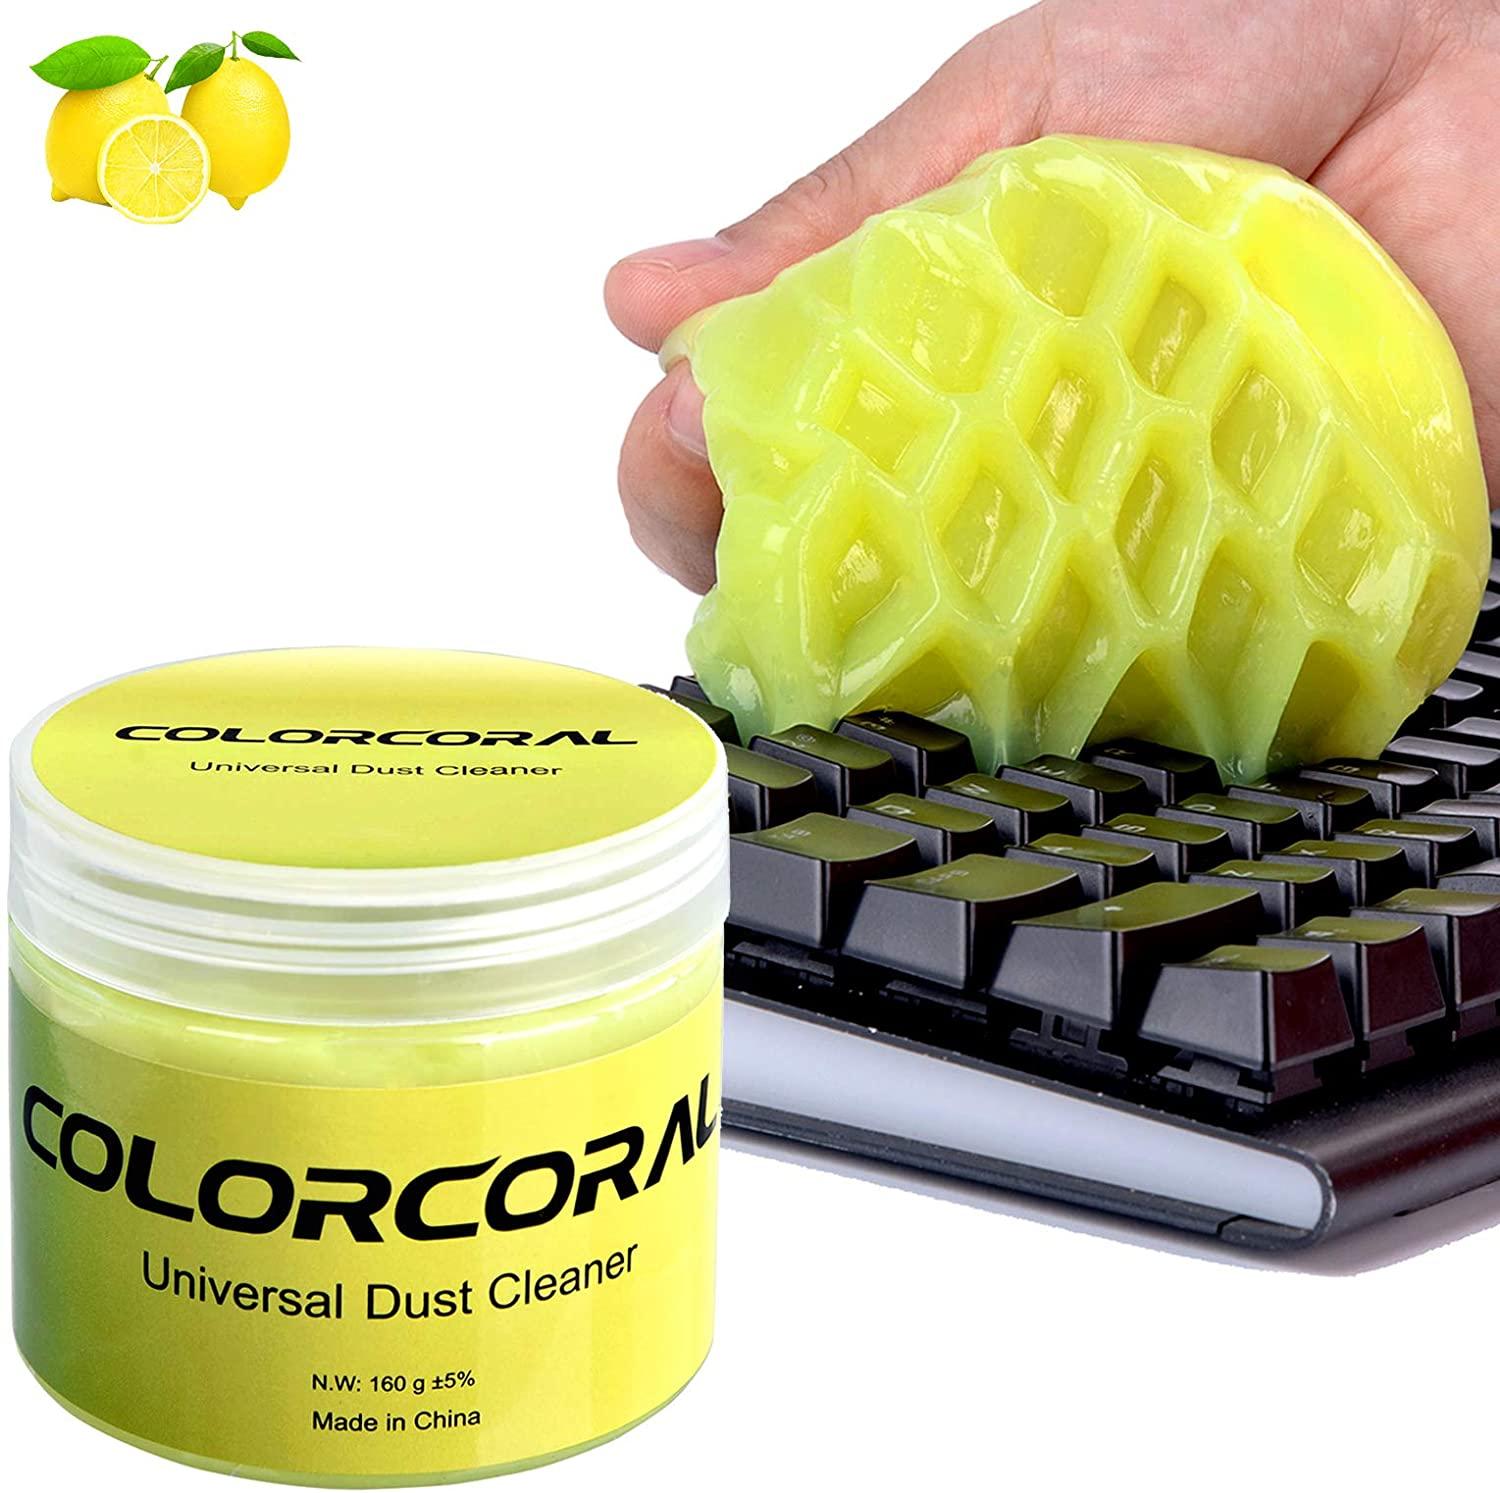 Cleaning Gel Universal Dust Cleaner for PC Keyboard for $5.94